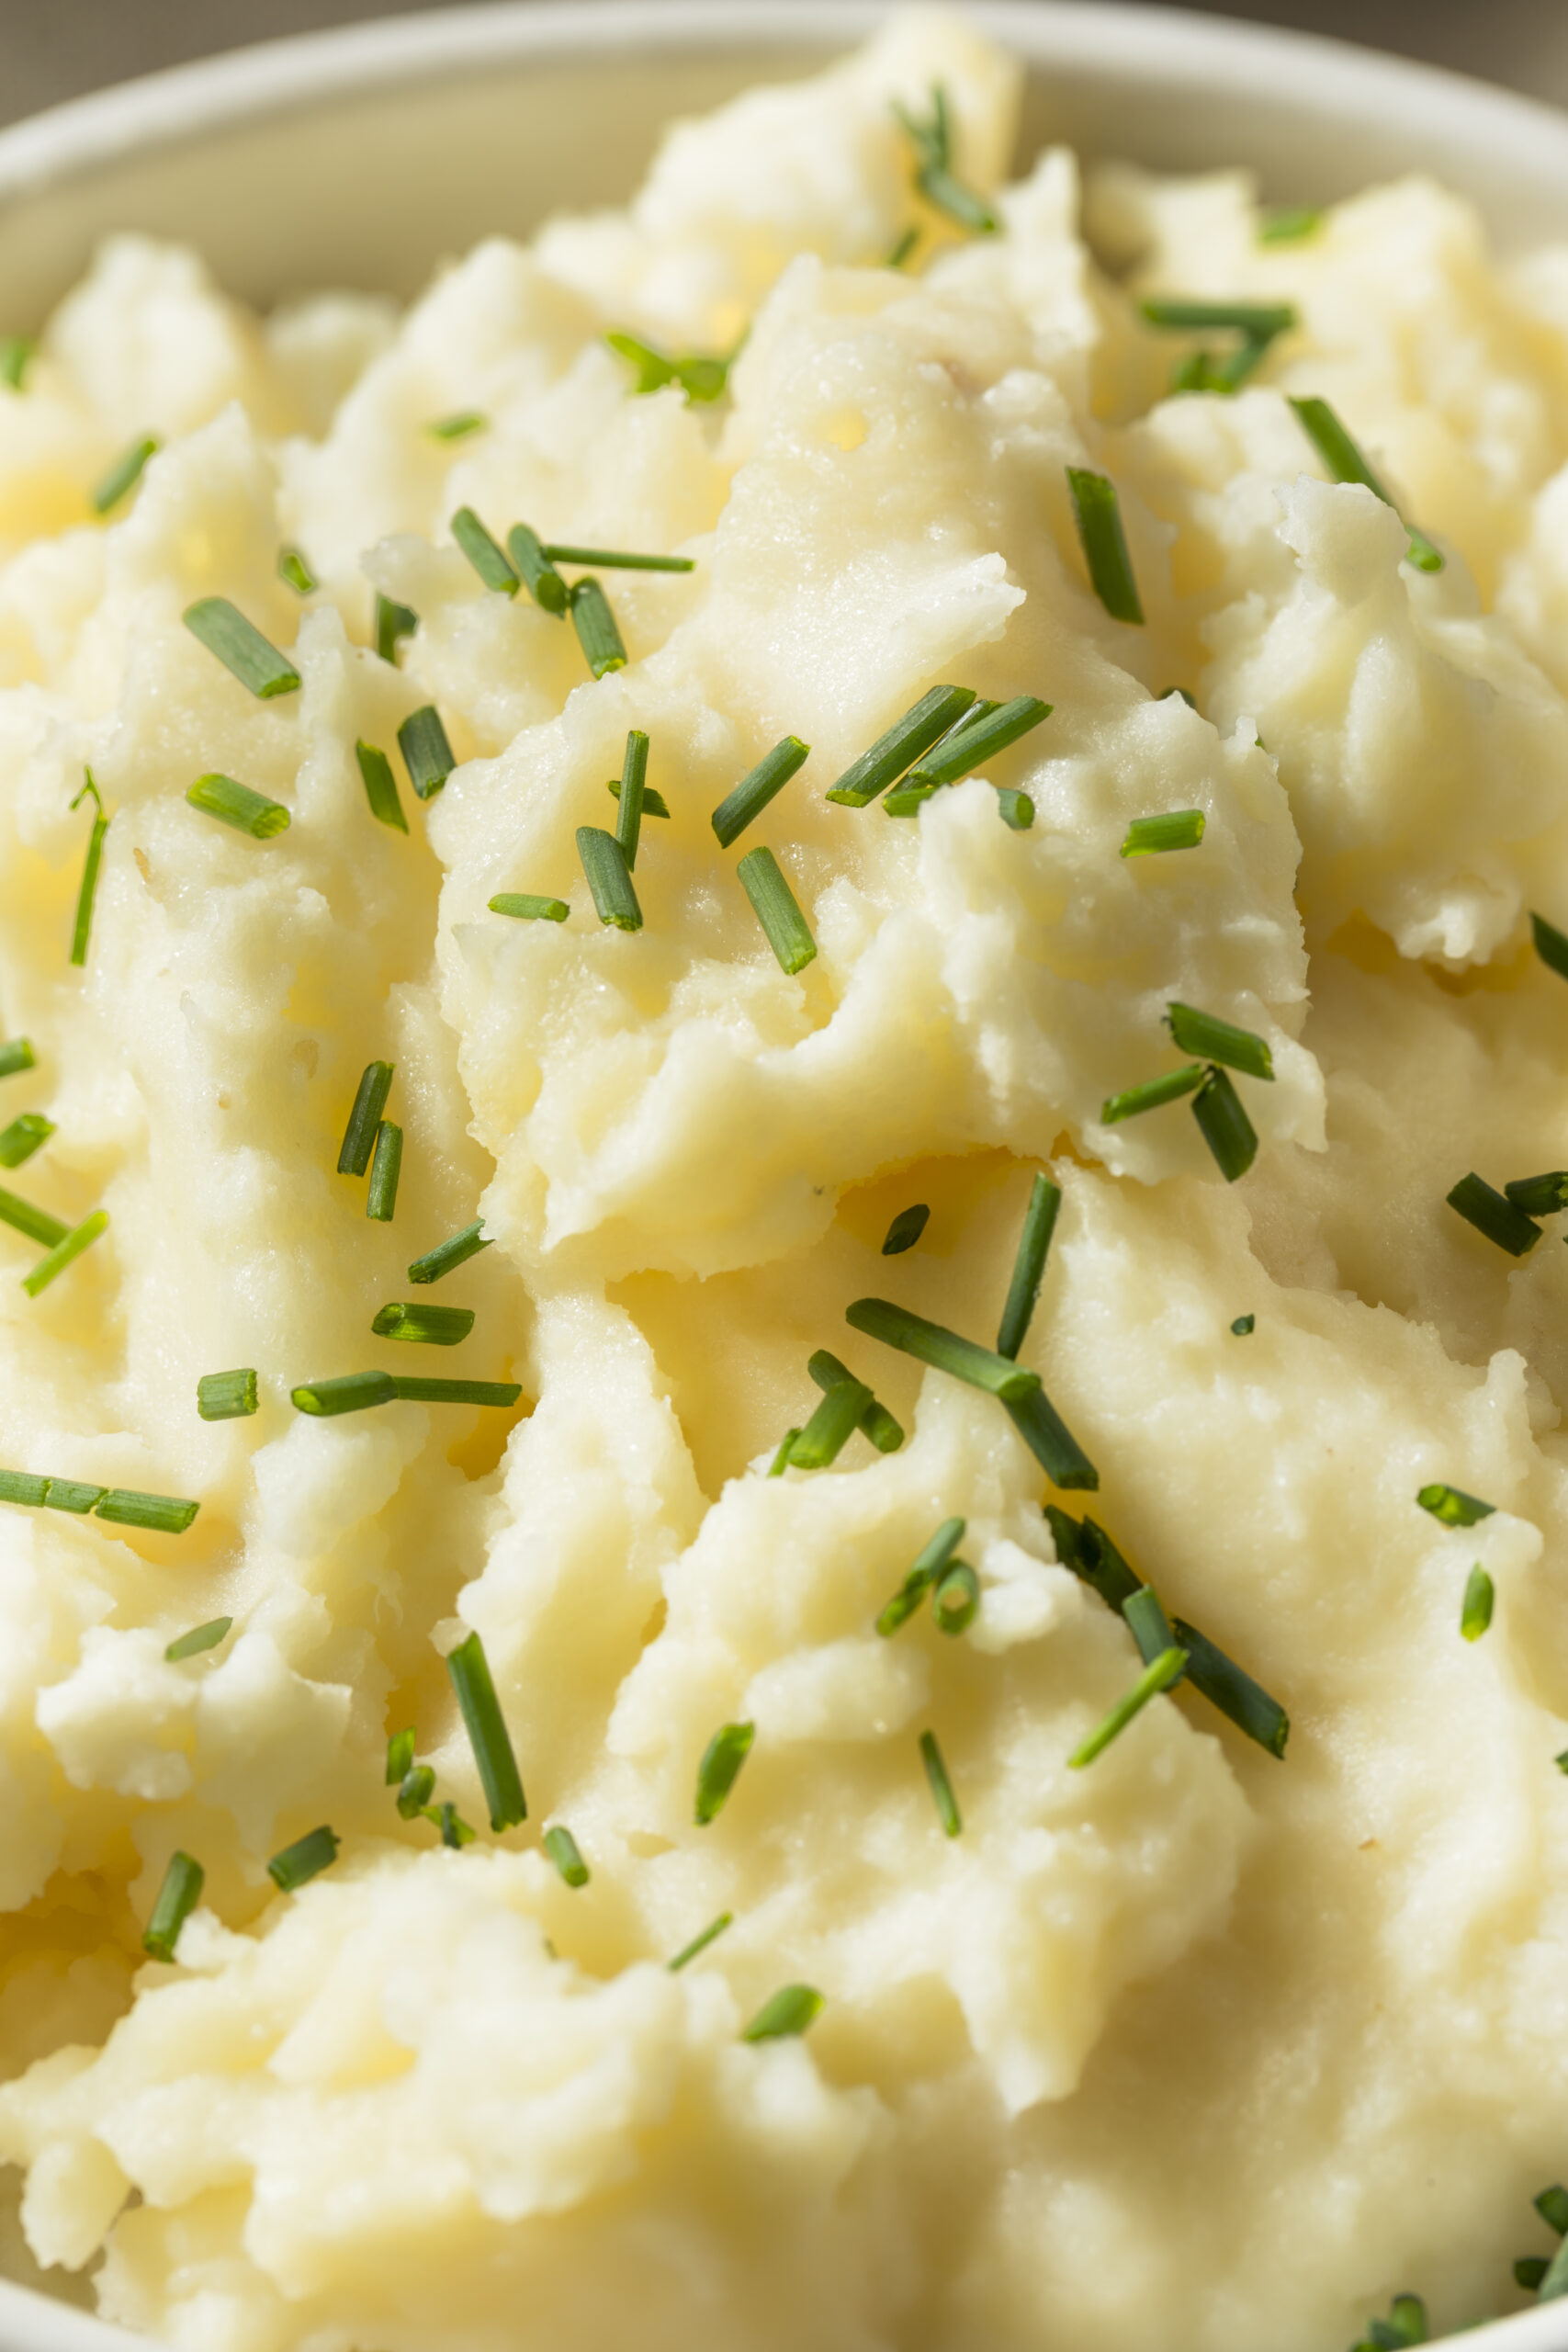 Make creamy, fluffy, perfect mashed potatoes easily by using the Instant Pot!